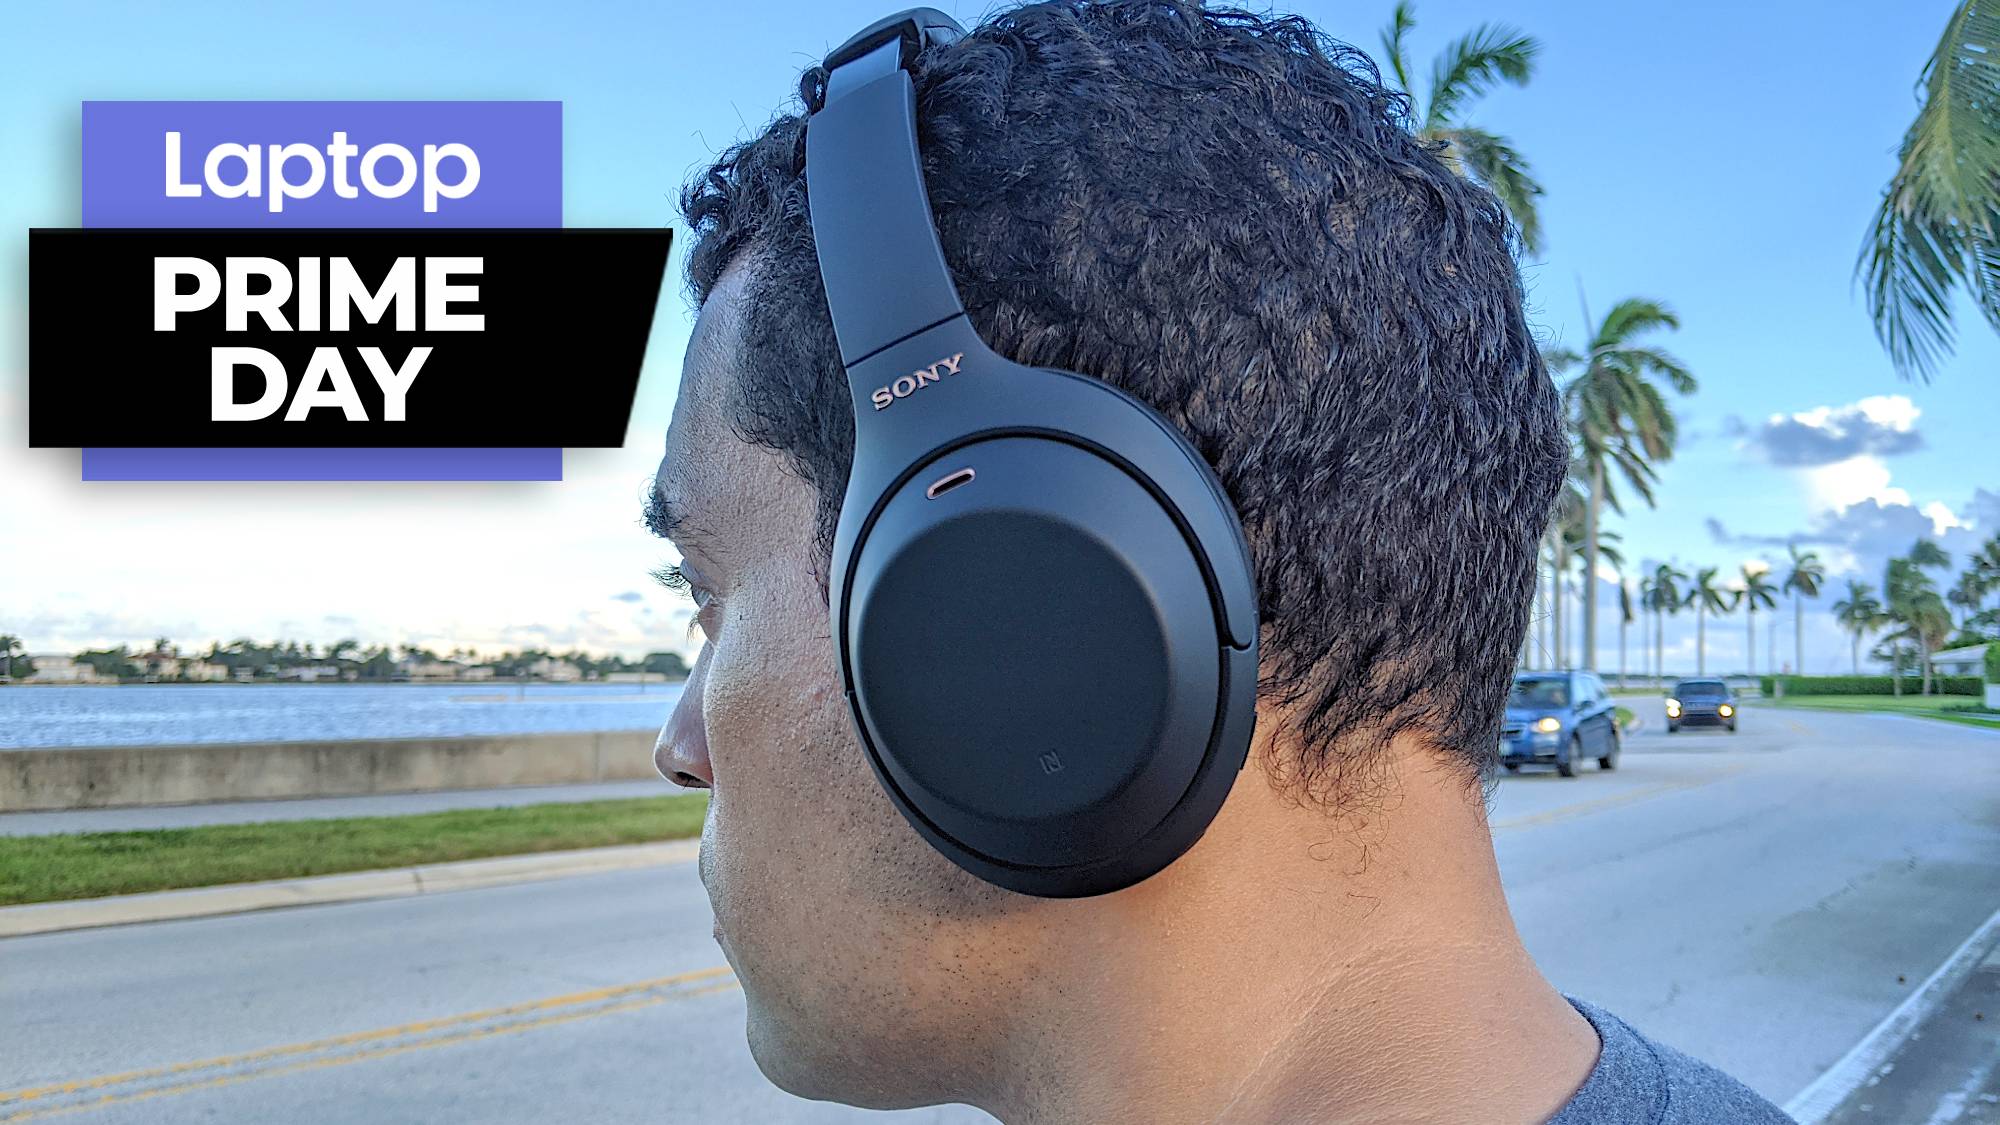 Here's $101 reasons to buy Sony WH-1000XM4 headphones this Prime Day